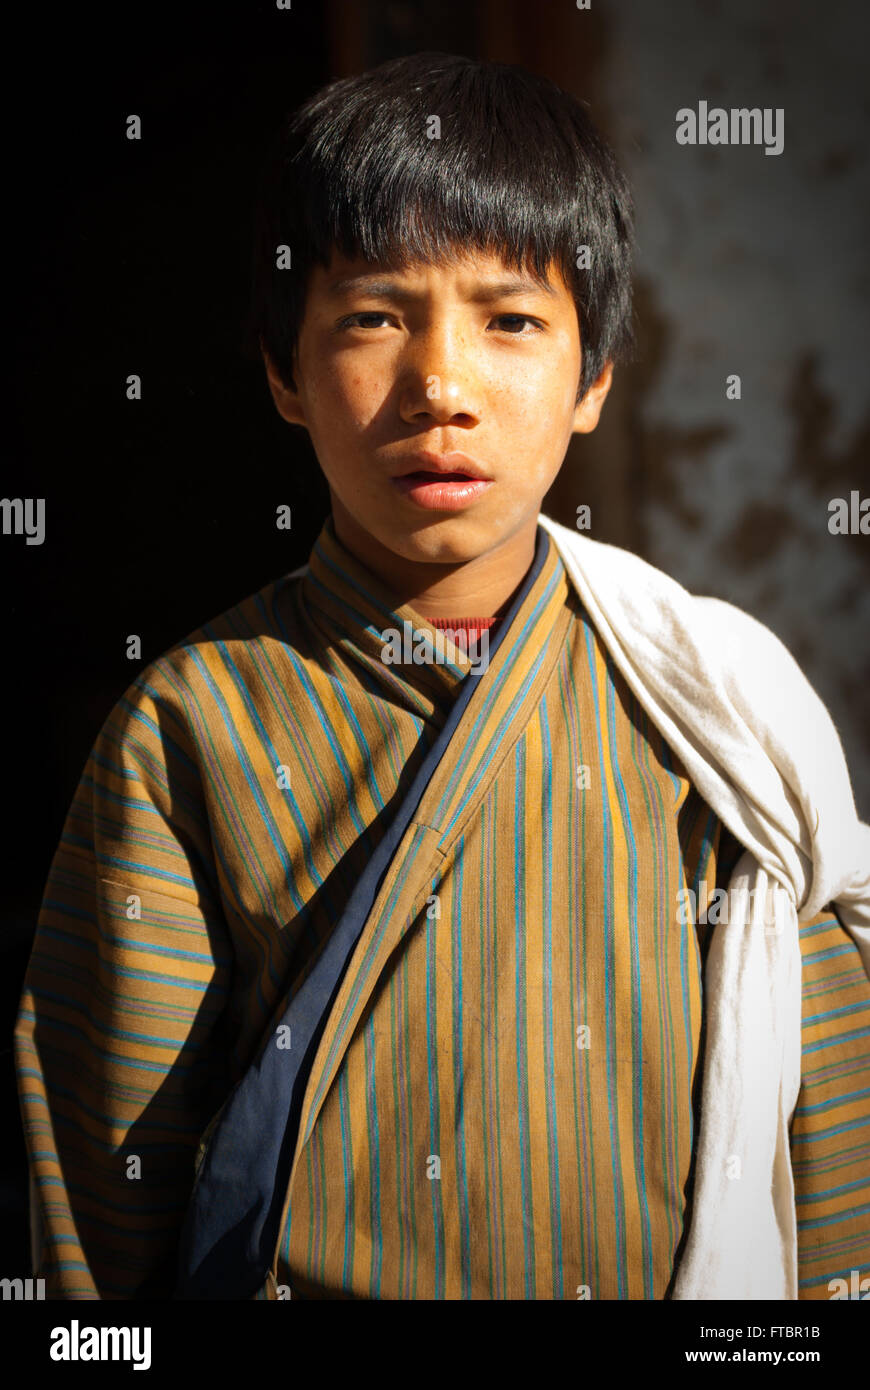 Portrait of a young Bhutanese boy wearing a traditional striped gho (robe) in Nimshong Village, southern Bhutan Stock Photo